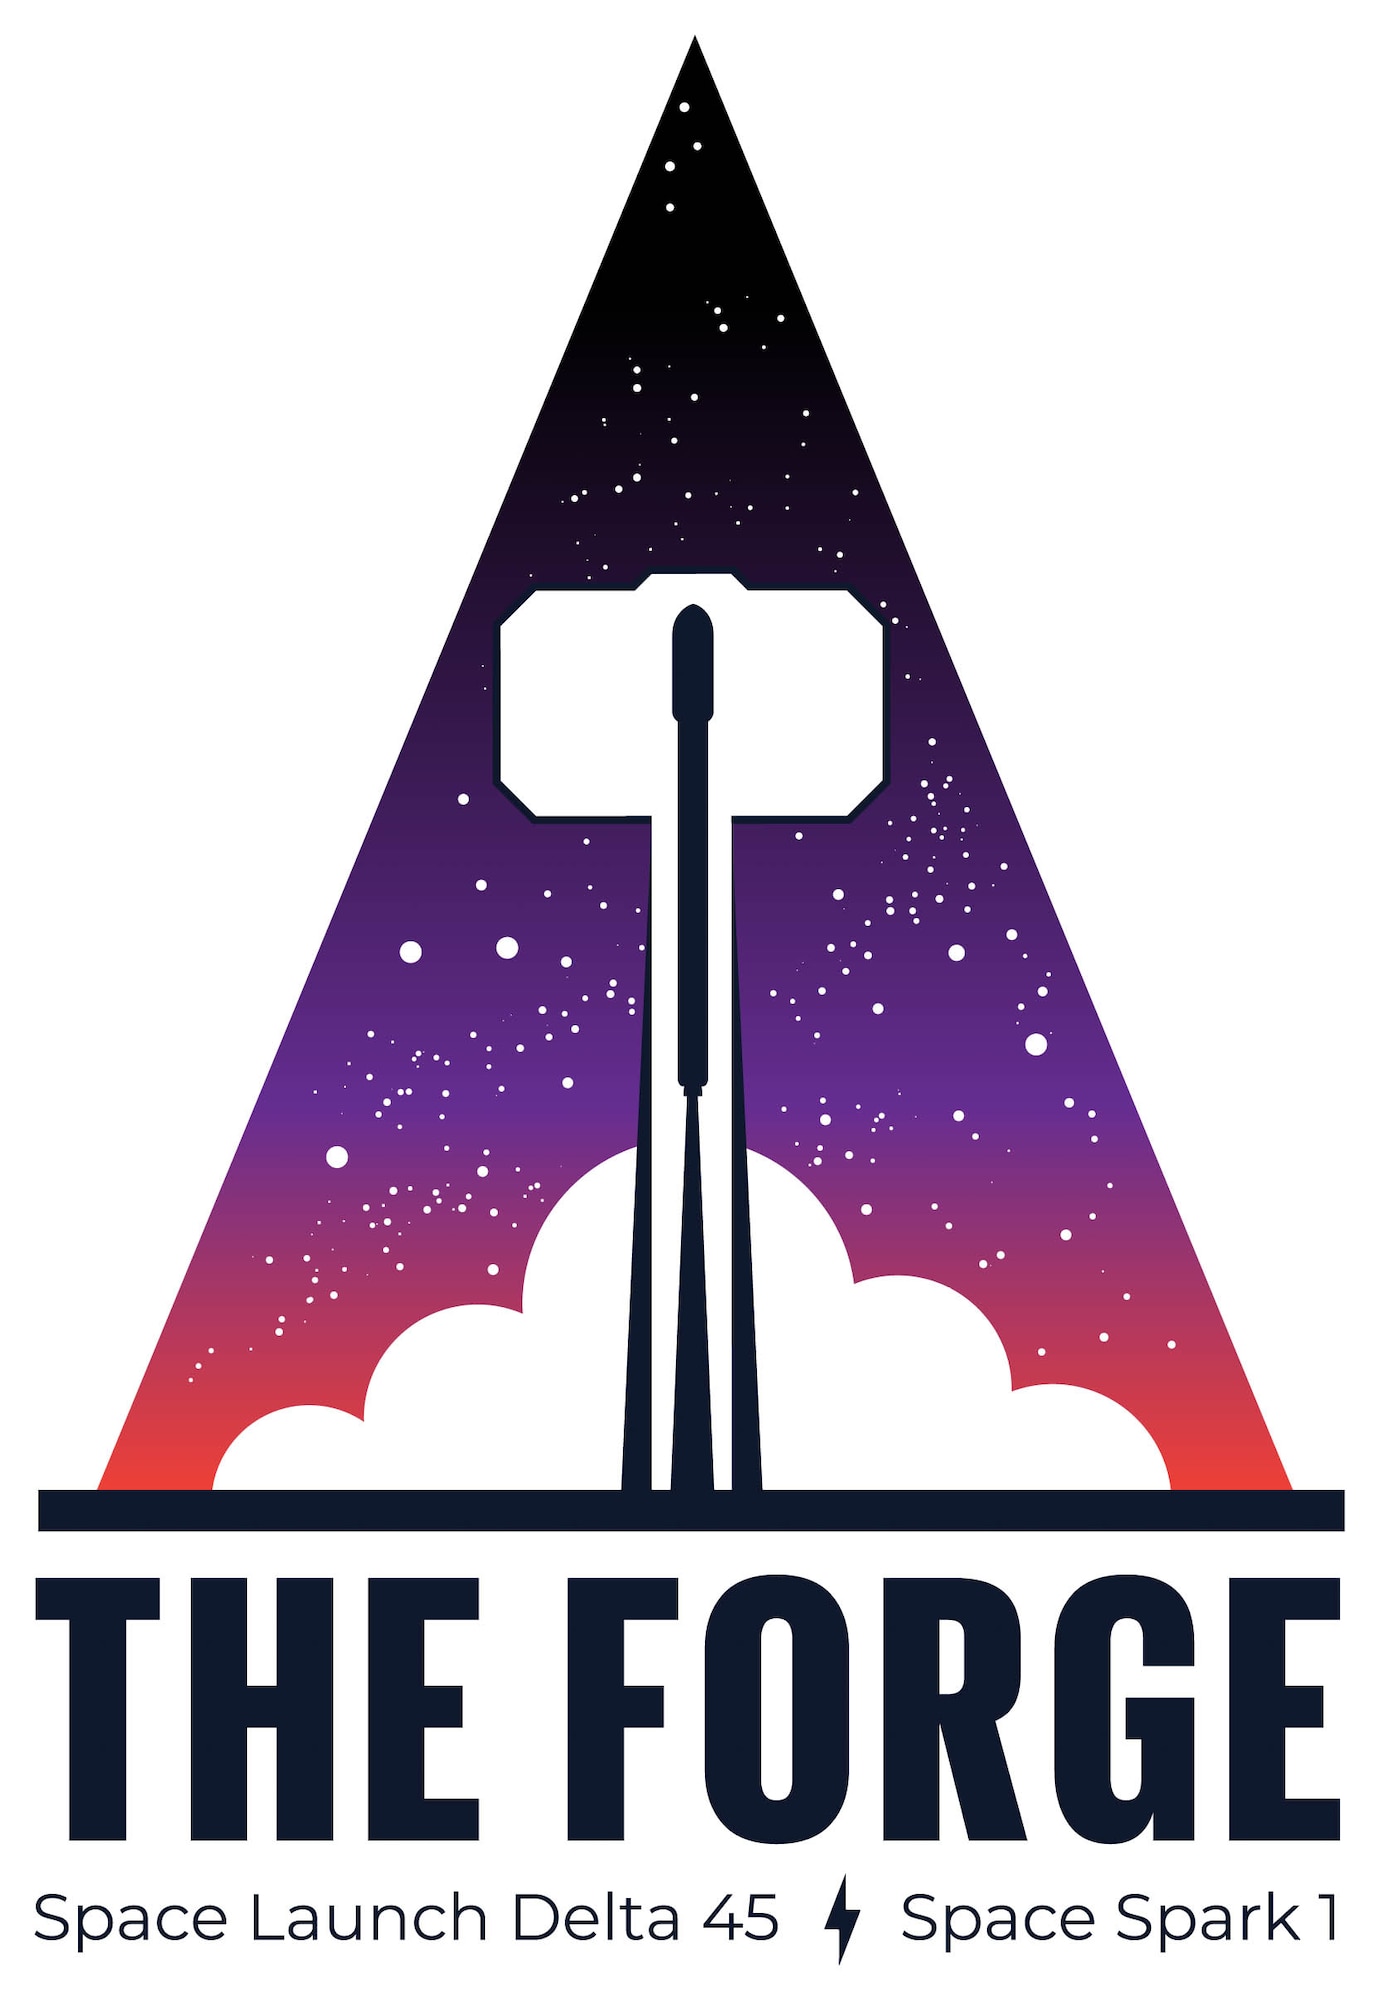 Graphic for Space Launch Delta 45's The Forge. The Forge is a Spark Cell designed as an innovation program that enables Guardians and Airmen to develop and implement locally generated solutions to issues identified within their organization. (U.S. Space Force graphic by the Difference)